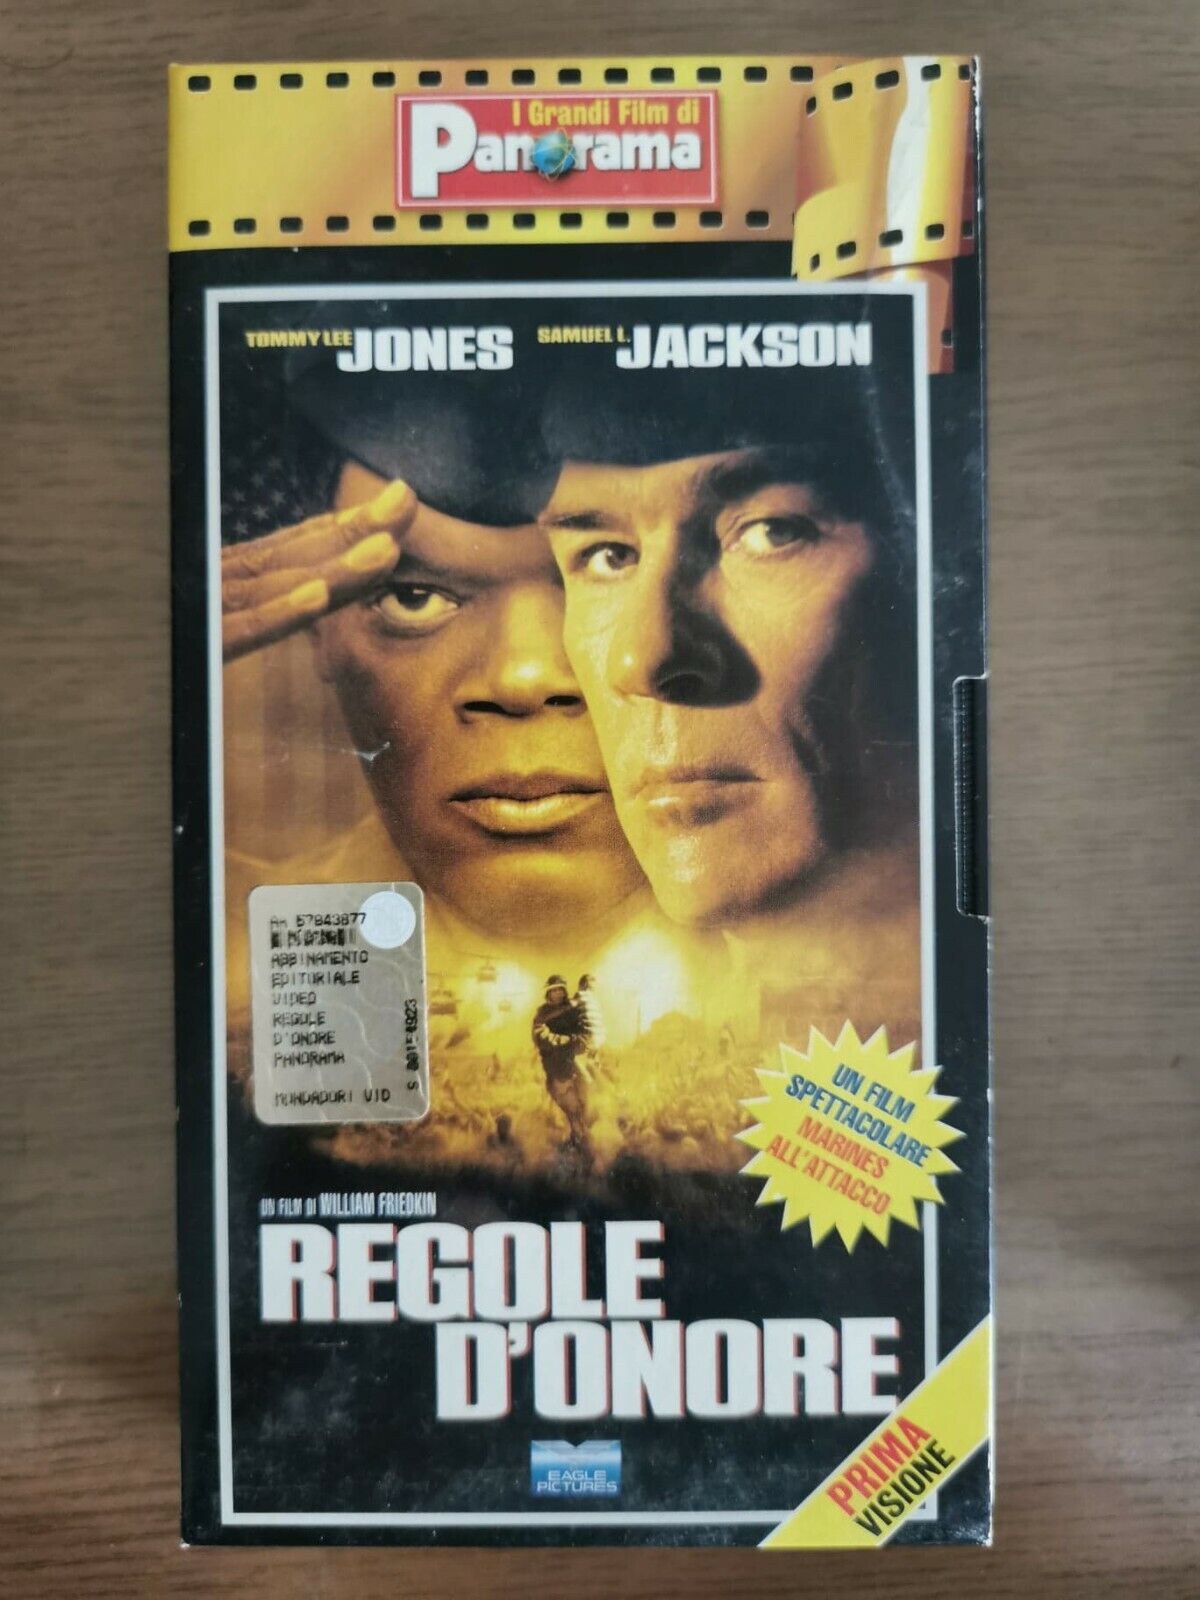 Regole d'onore - W. Friedkin - Panorama - 2000 - VHS - AR vhs usato